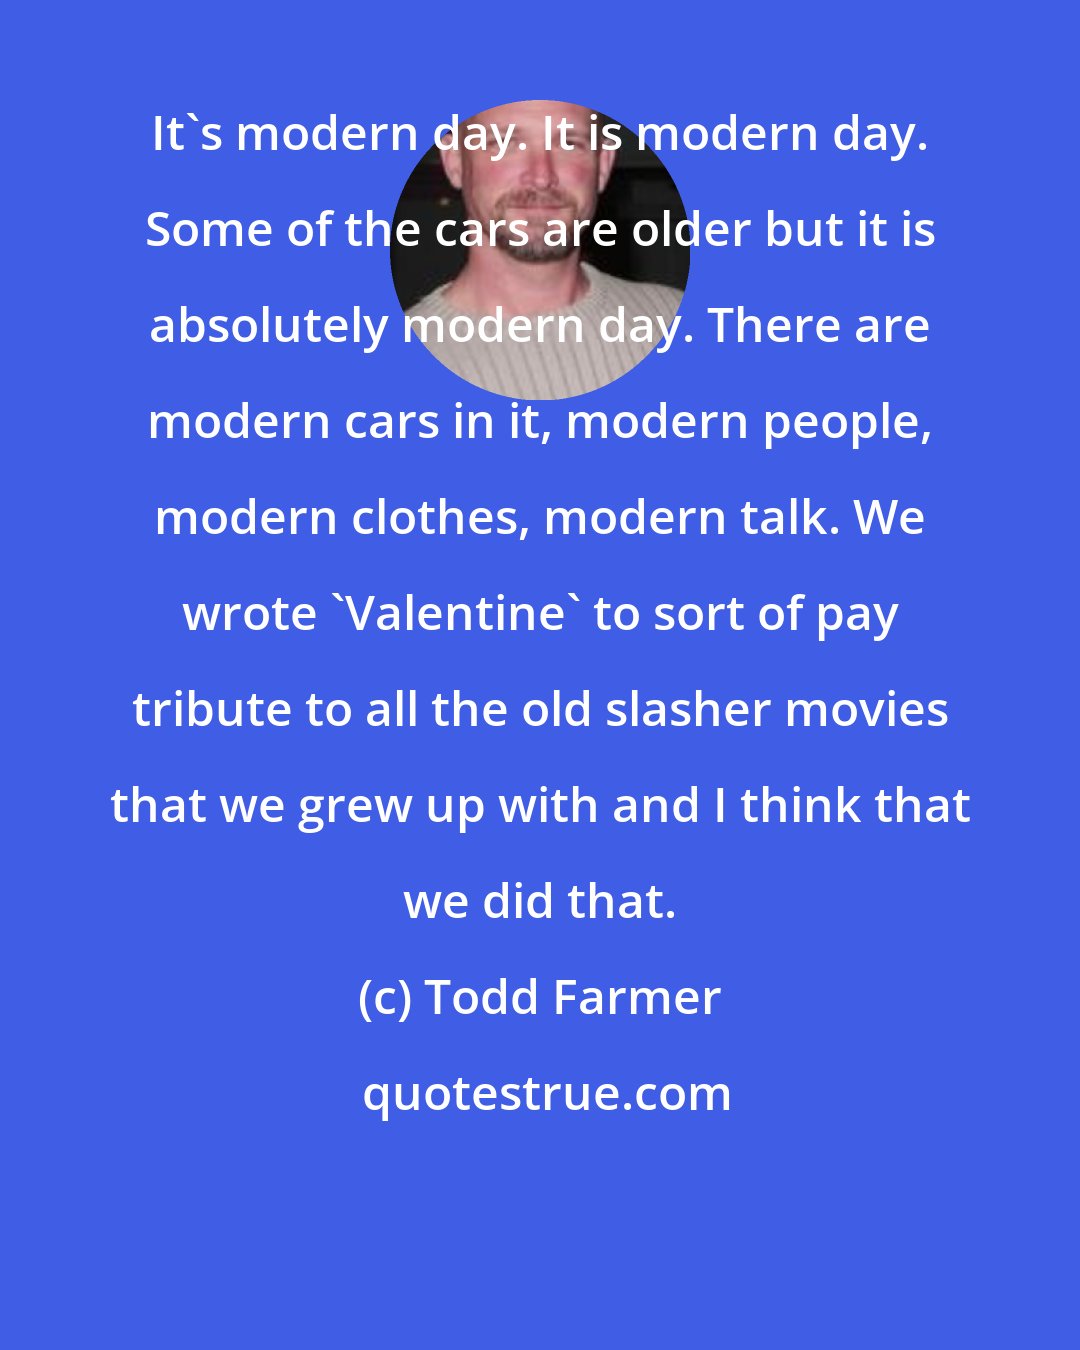 Todd Farmer: It's modern day. It is modern day. Some of the cars are older but it is absolutely modern day. There are modern cars in it, modern people, modern clothes, modern talk. We wrote 'Valentine' to sort of pay tribute to all the old slasher movies that we grew up with and I think that we did that.